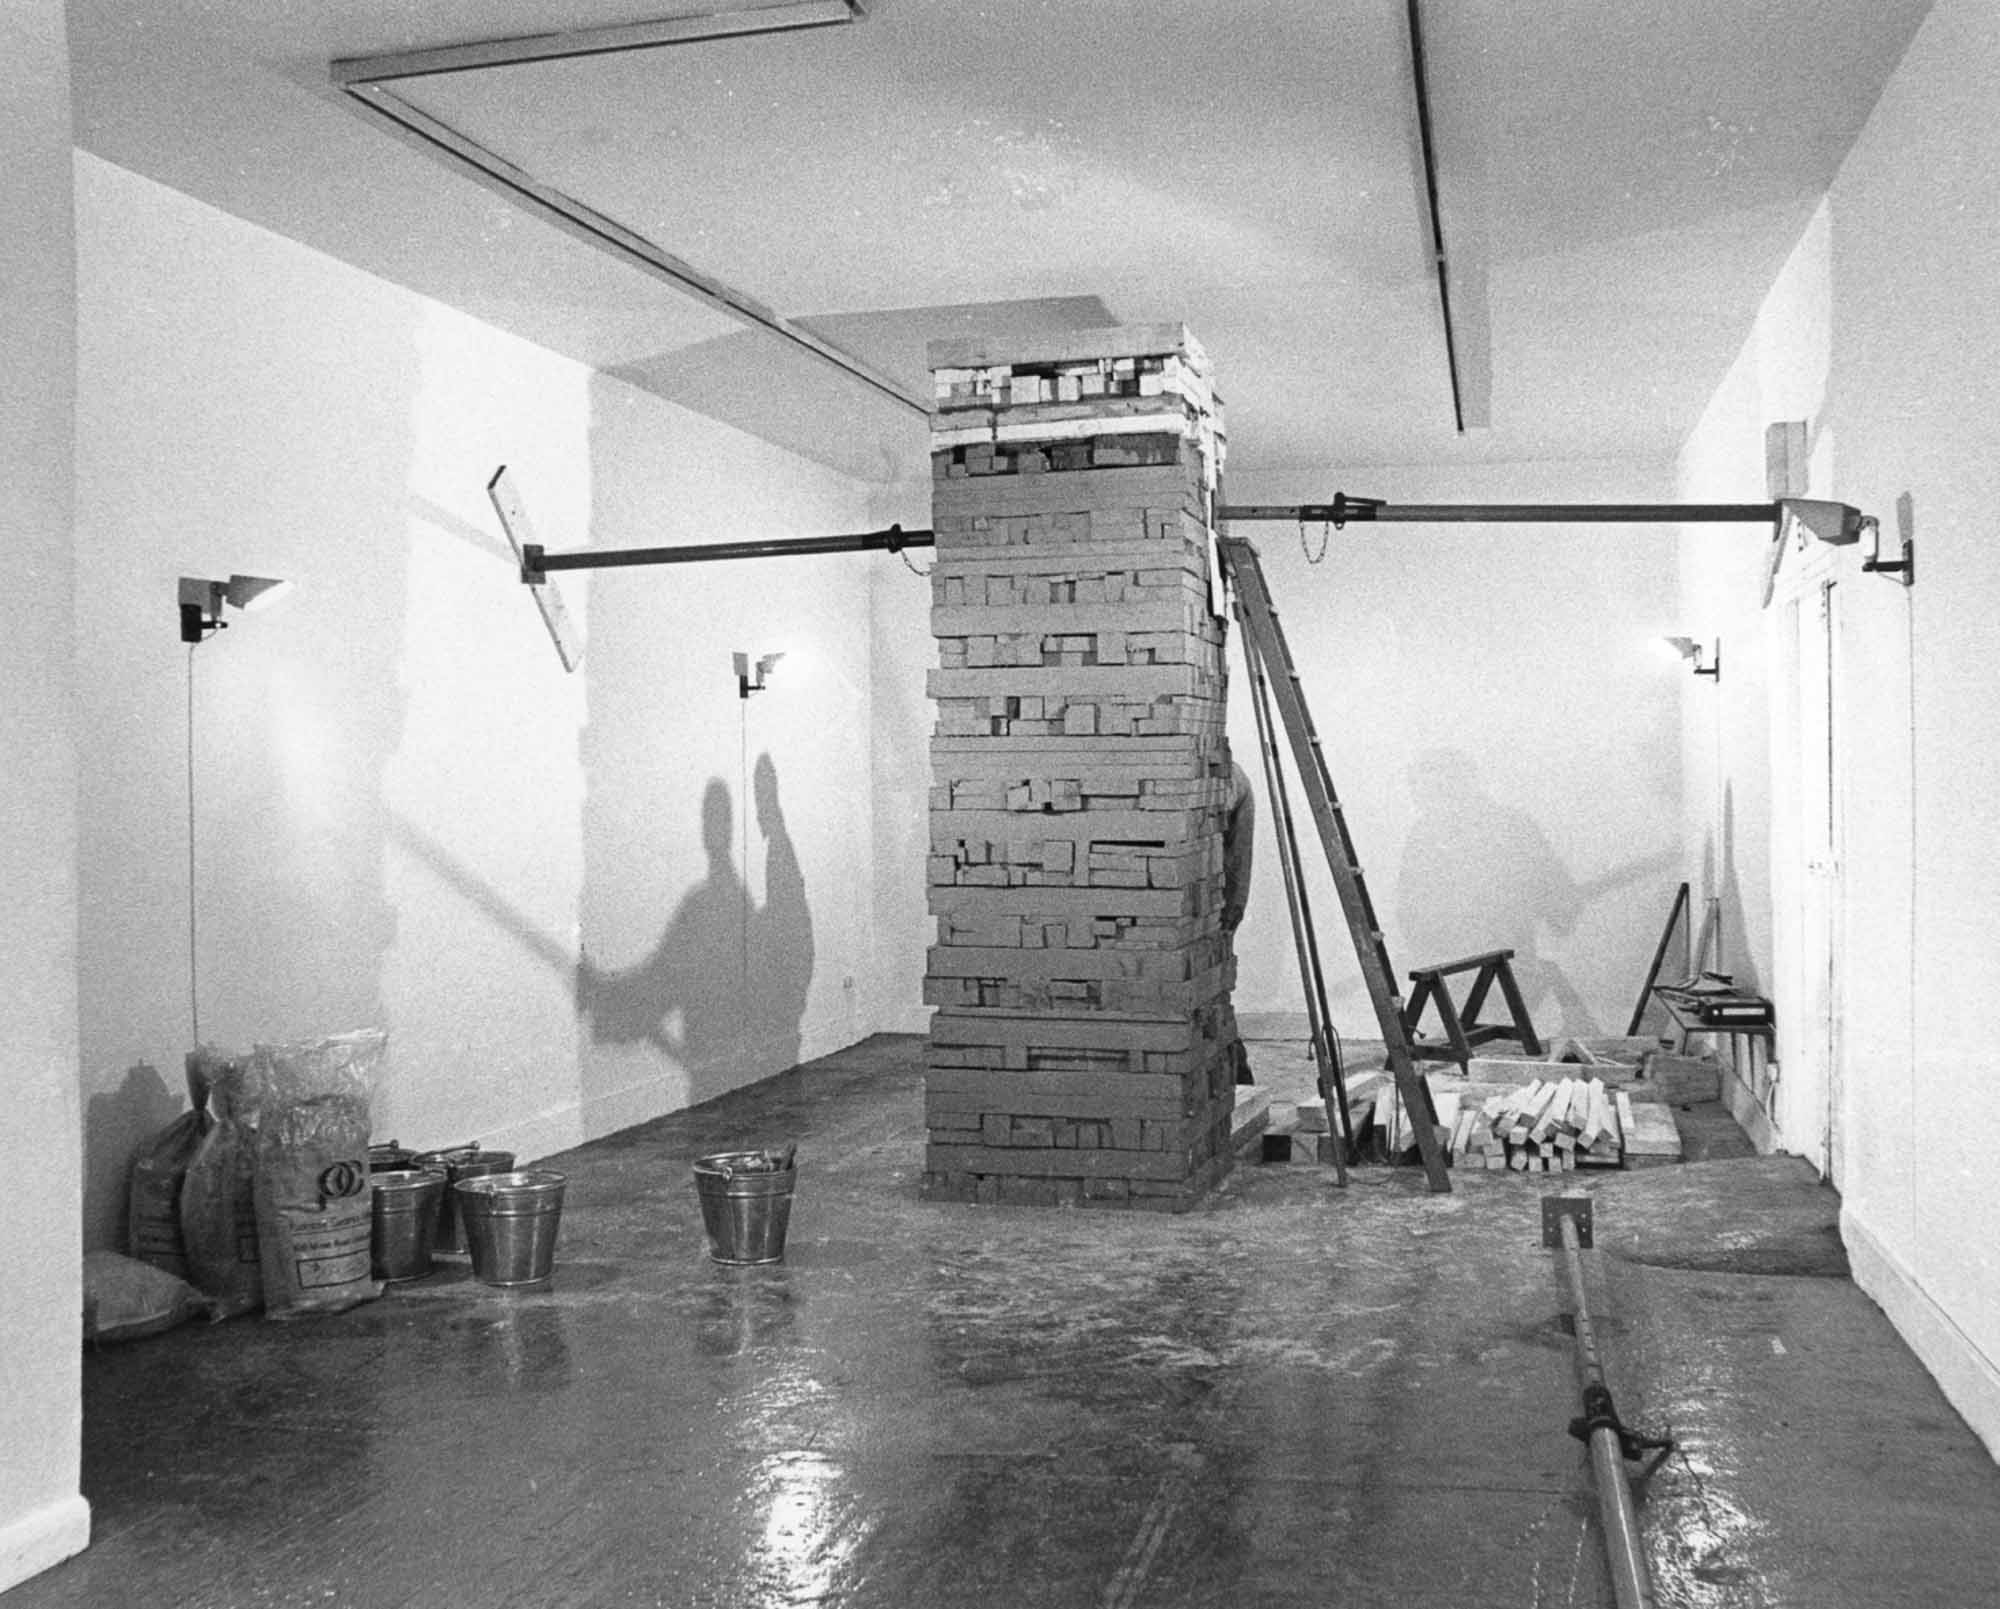 Nigel Rolfe, Red Wedge at The Acme Gallery, London, 3 - 15 July (1978). Courtesy of Acme, Acme Archive.